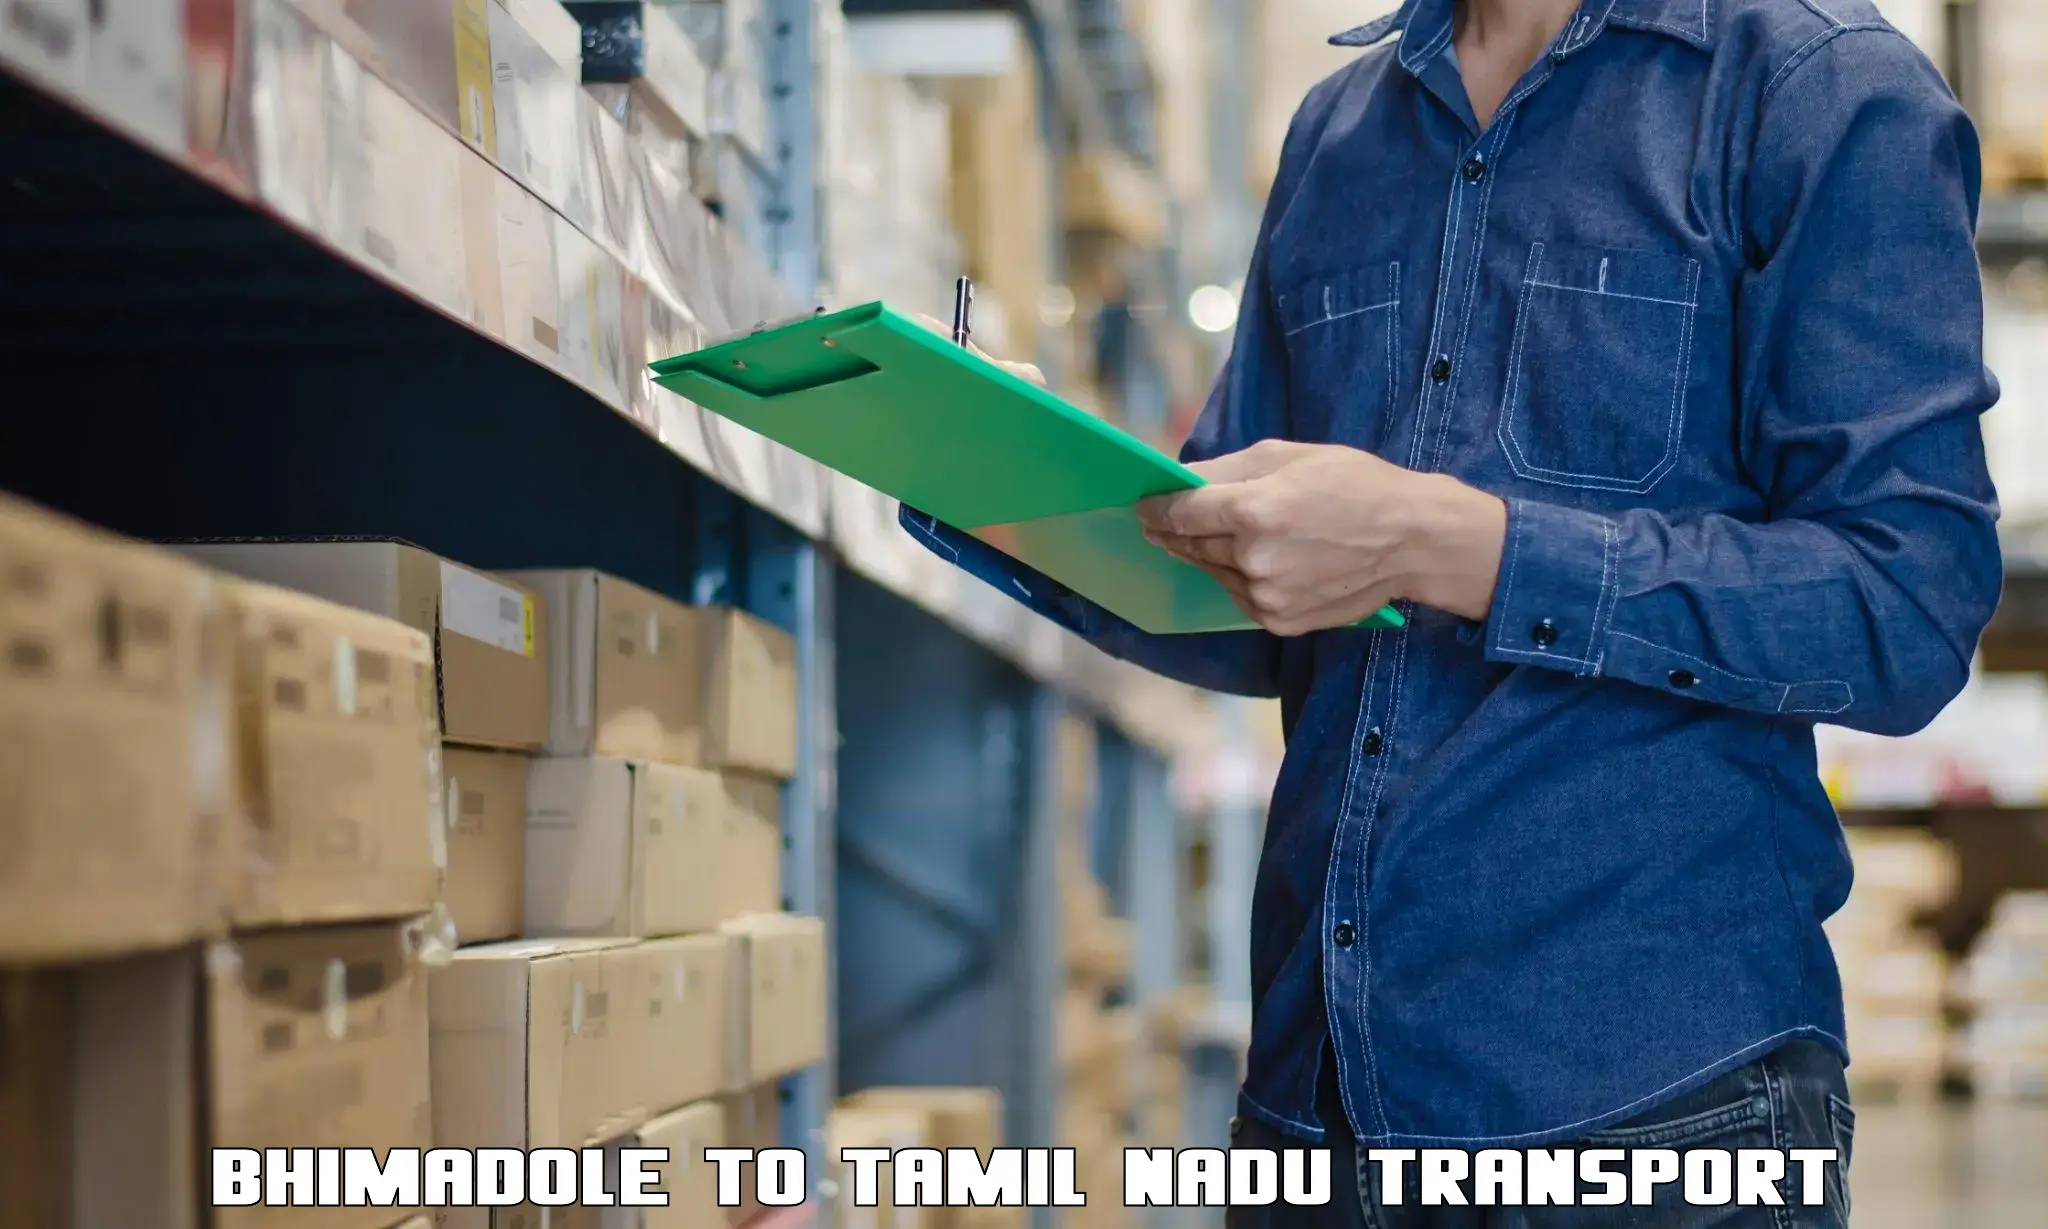 Delivery service Bhimadole to Muthukulathur